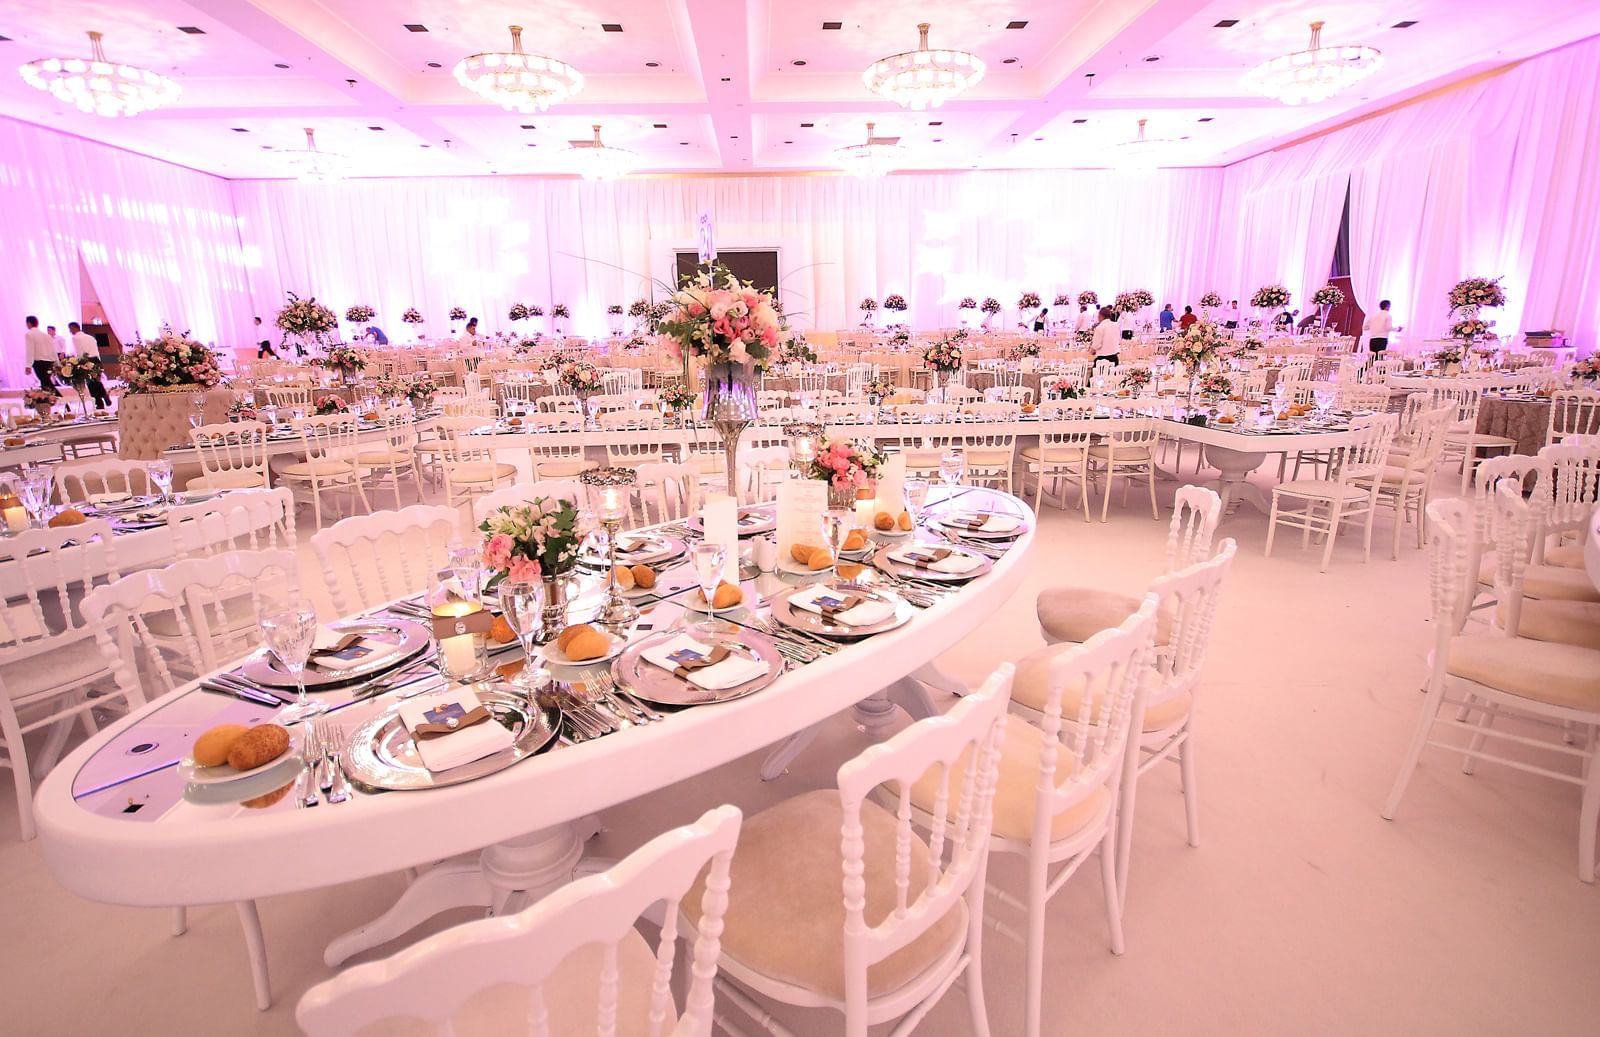 Wedding hall witrh oval shape at Wow Hotels Group 